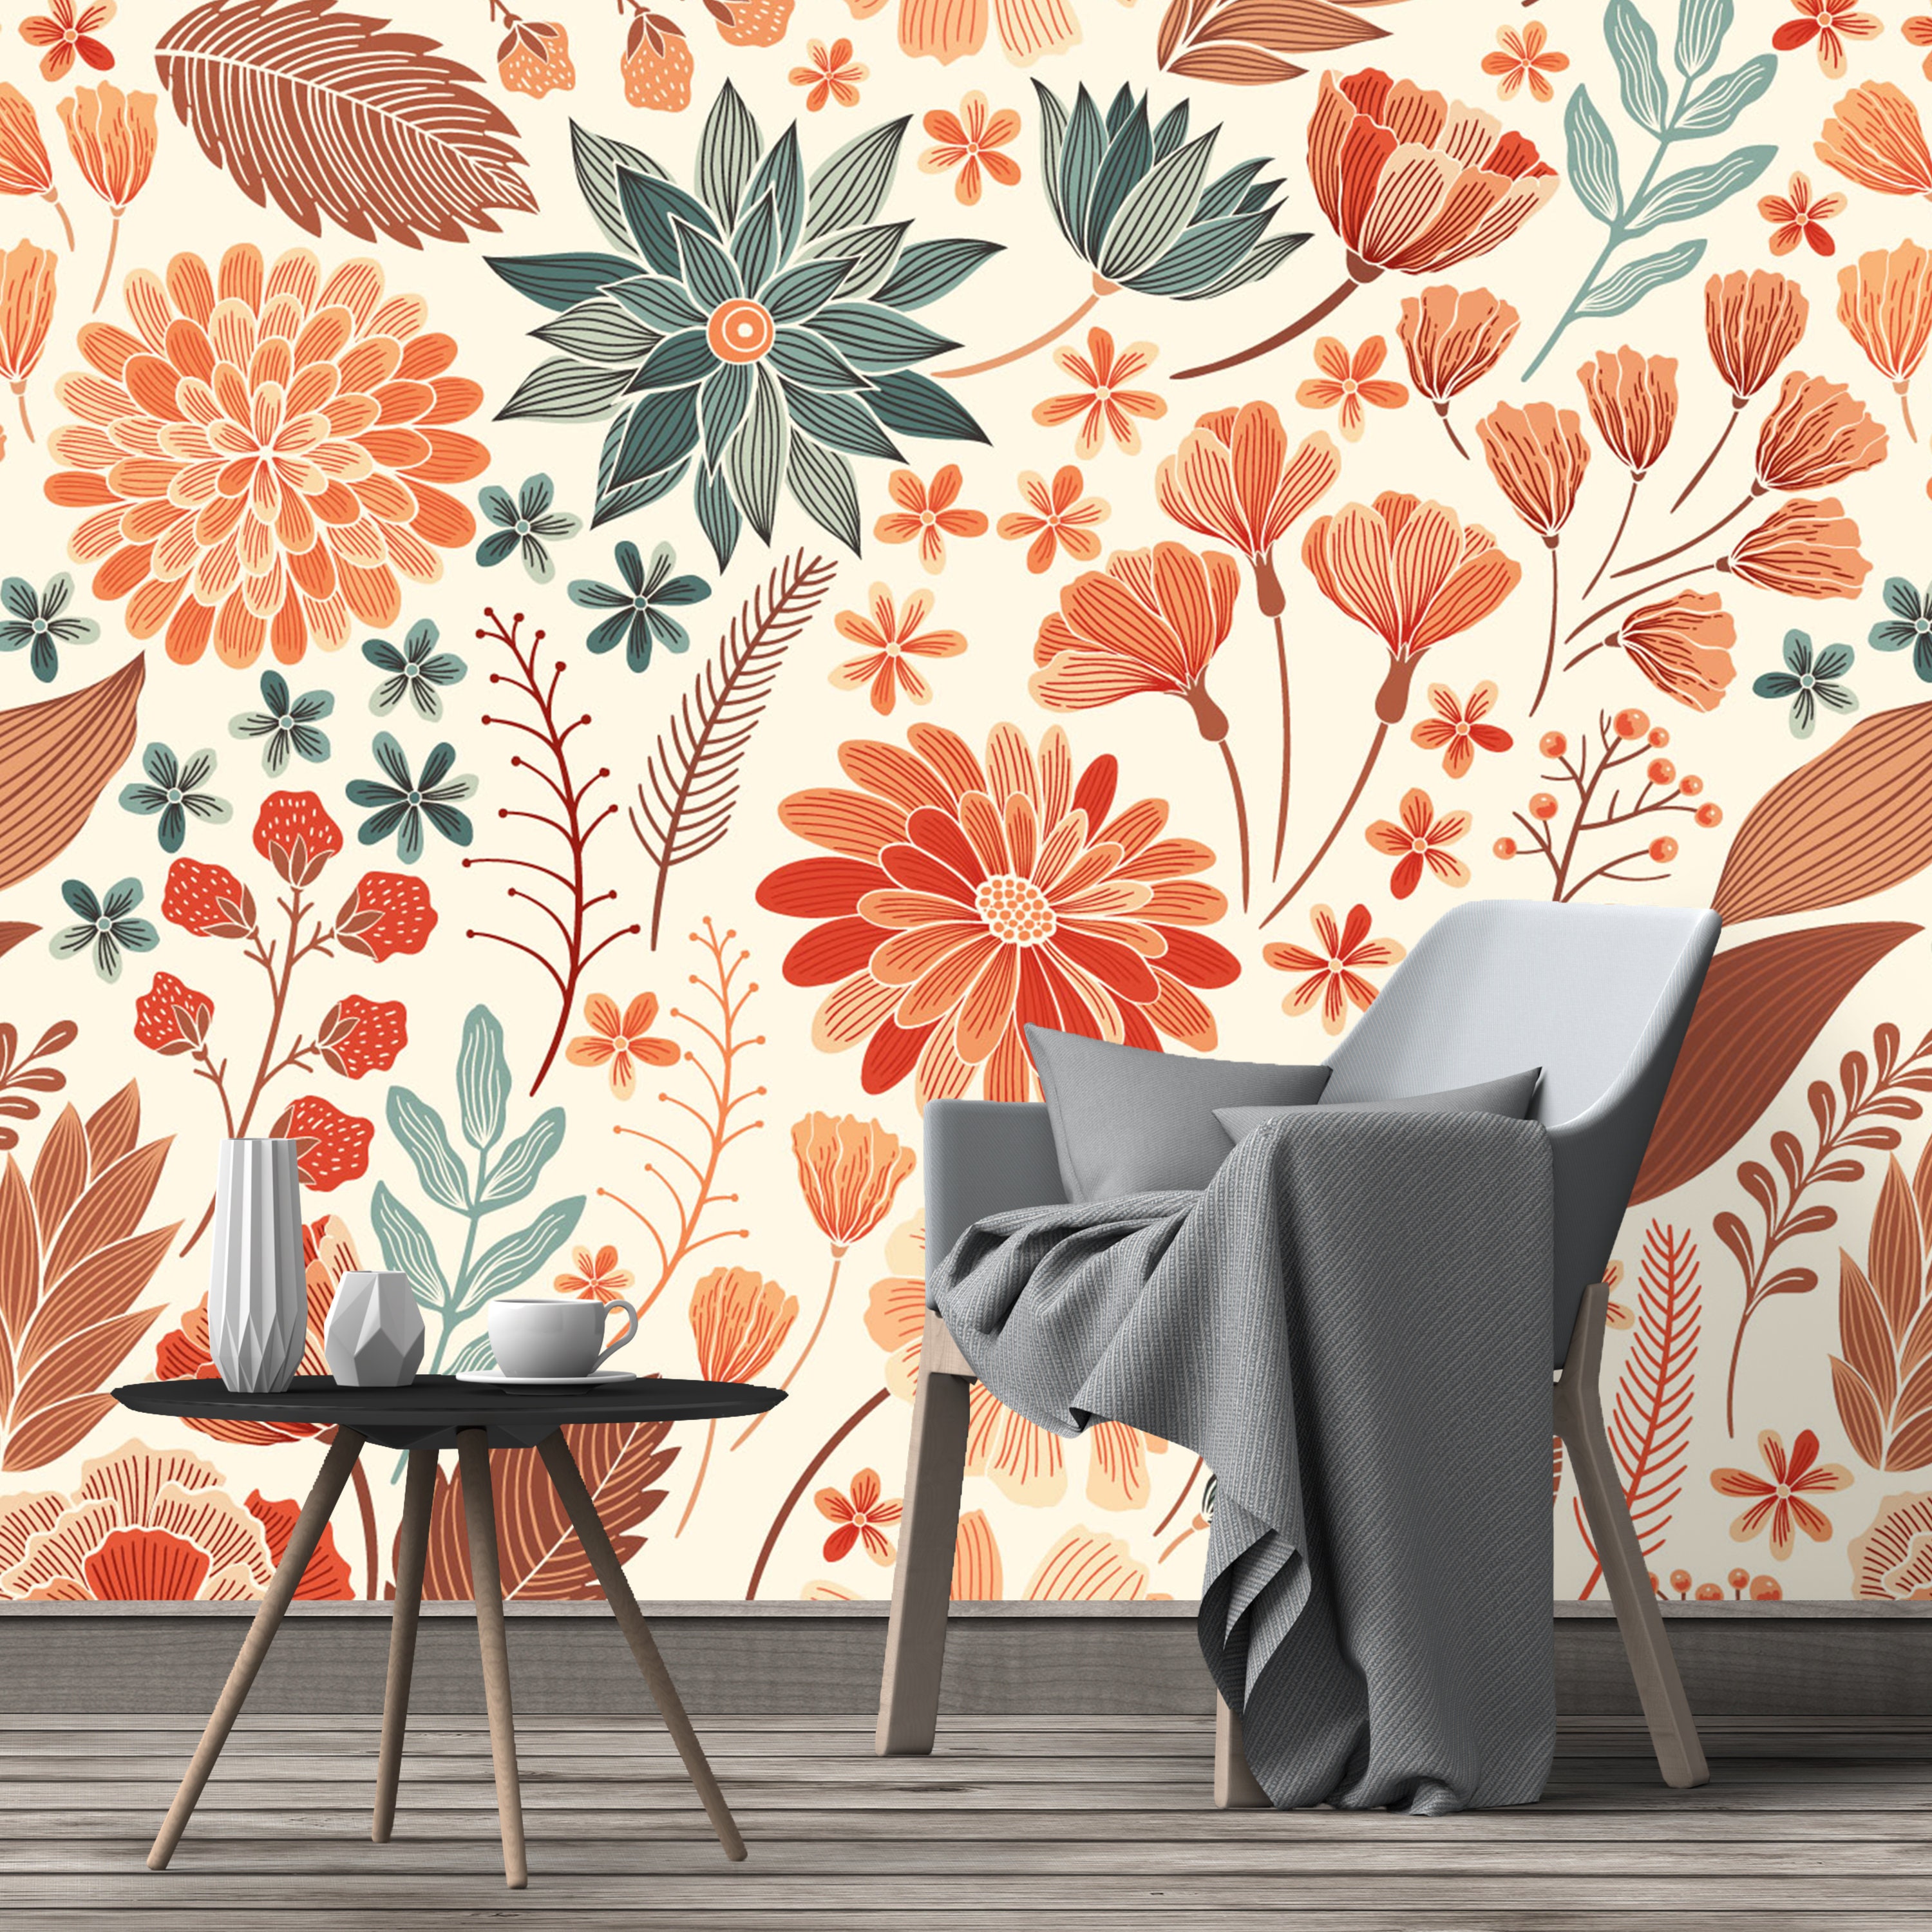 NextWall Garden Block Floral 216 x 205 Peel and Stick Wallpaper in Orange  and Ebony  NFM